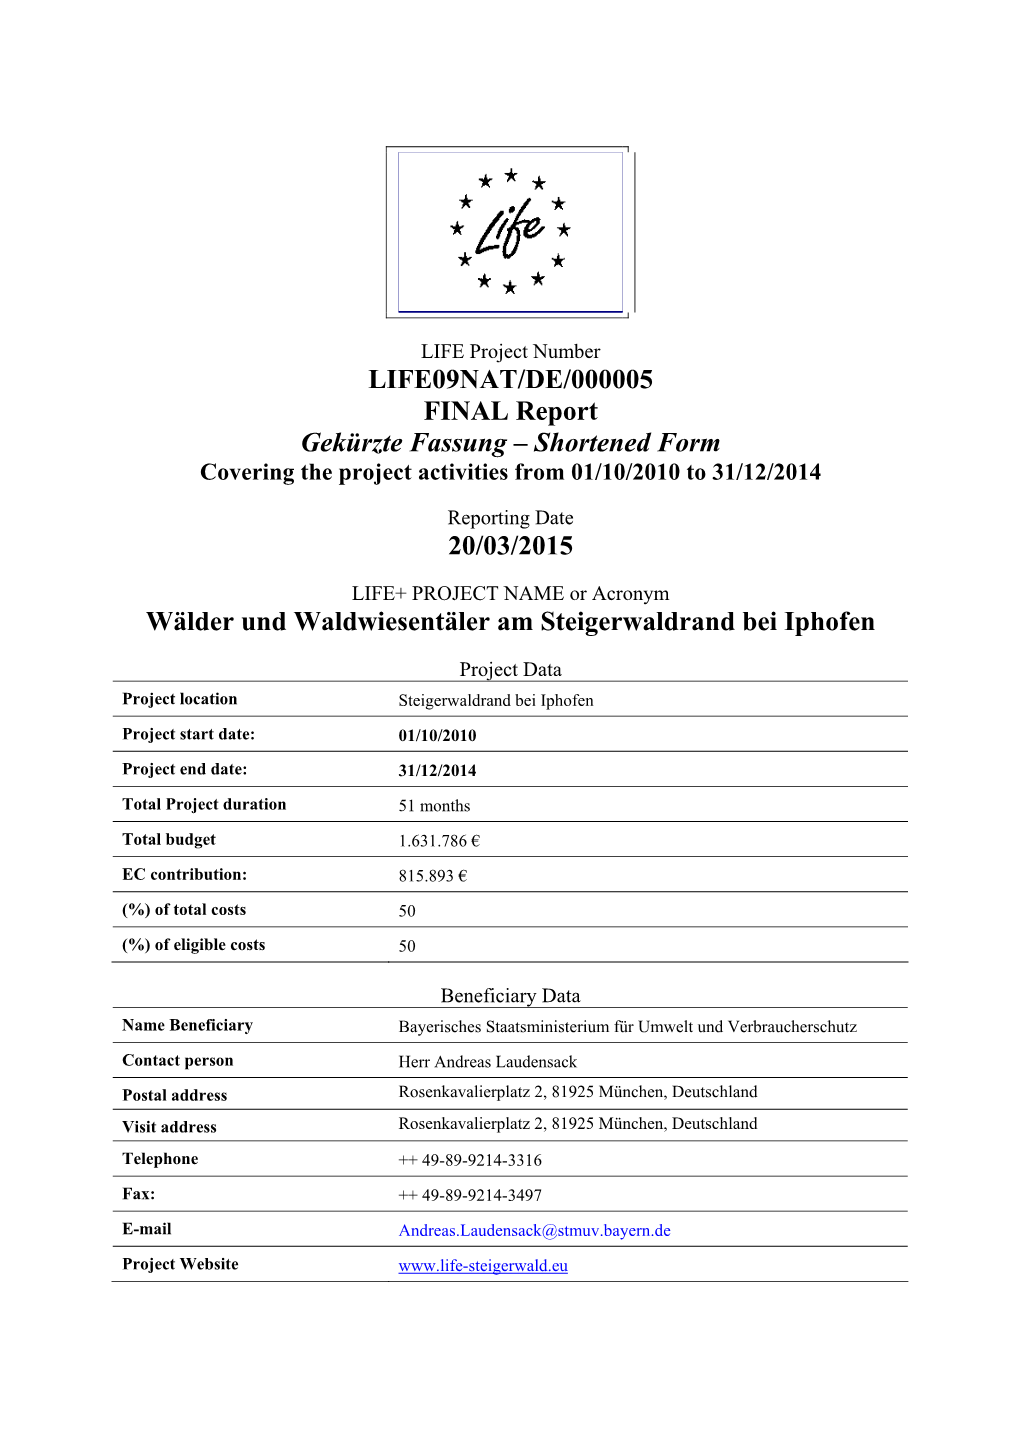 LIFE09NAT/DE/000005 FINAL Report Gekürzte Fassung – Shortened Form Covering the Project Activities from 01/10/2010 to 31/12/2014